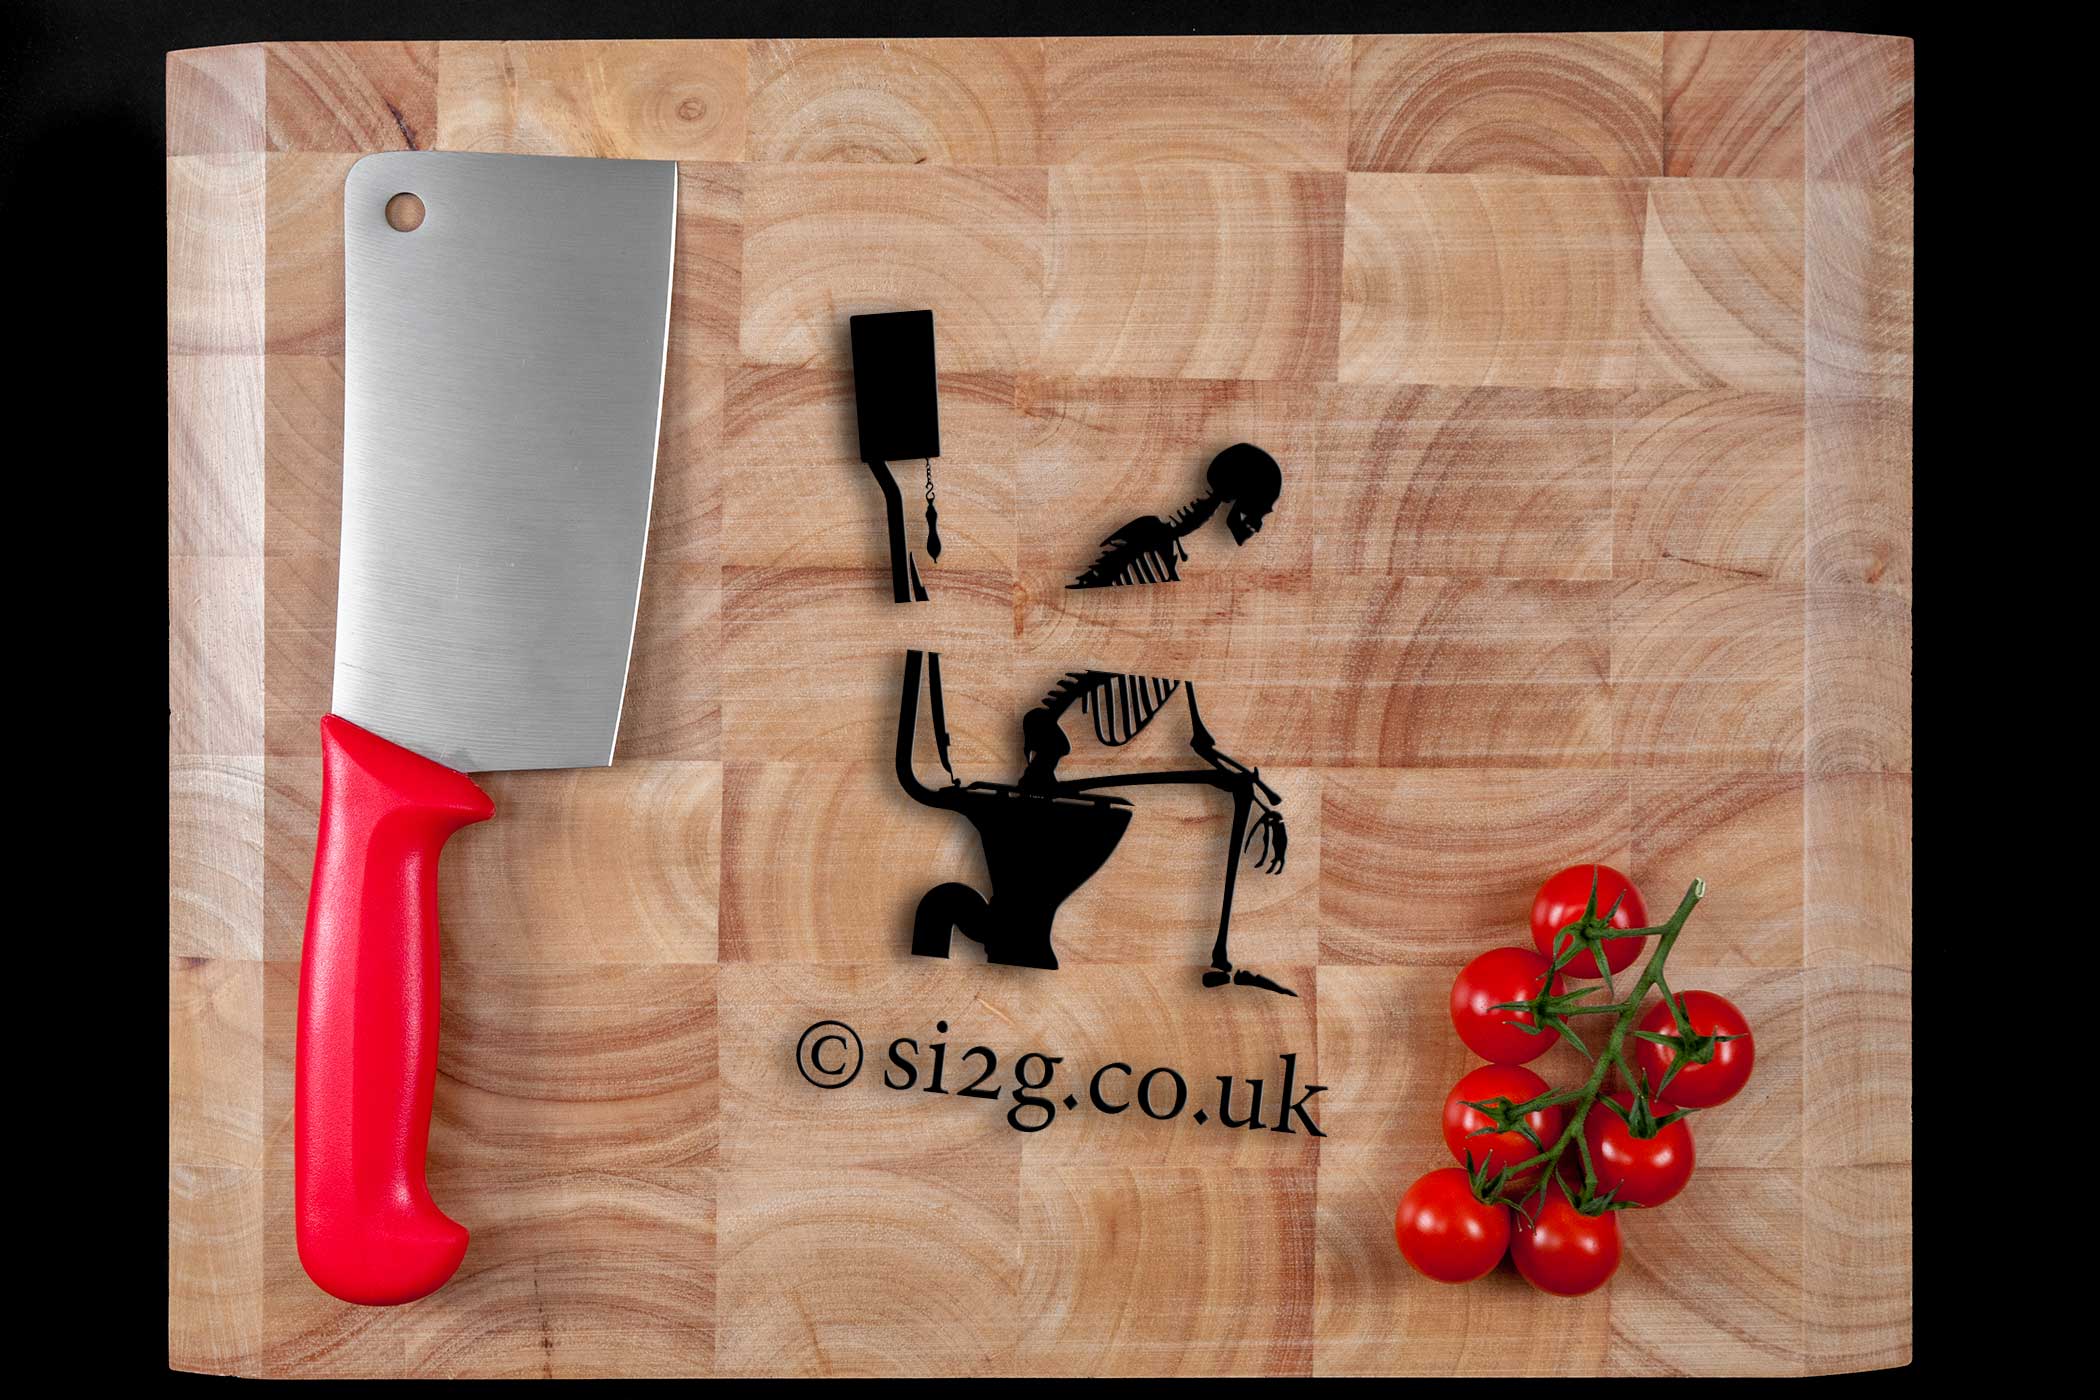 Chopping Board Graphic Background - We conceived this chopping board idea as a graphic background for a restaurant.  The empty board allowed a themed space for logos and text.  We removed the clients logo in this image but replaced it with our familiar skeleton logo to show you what it looked like.